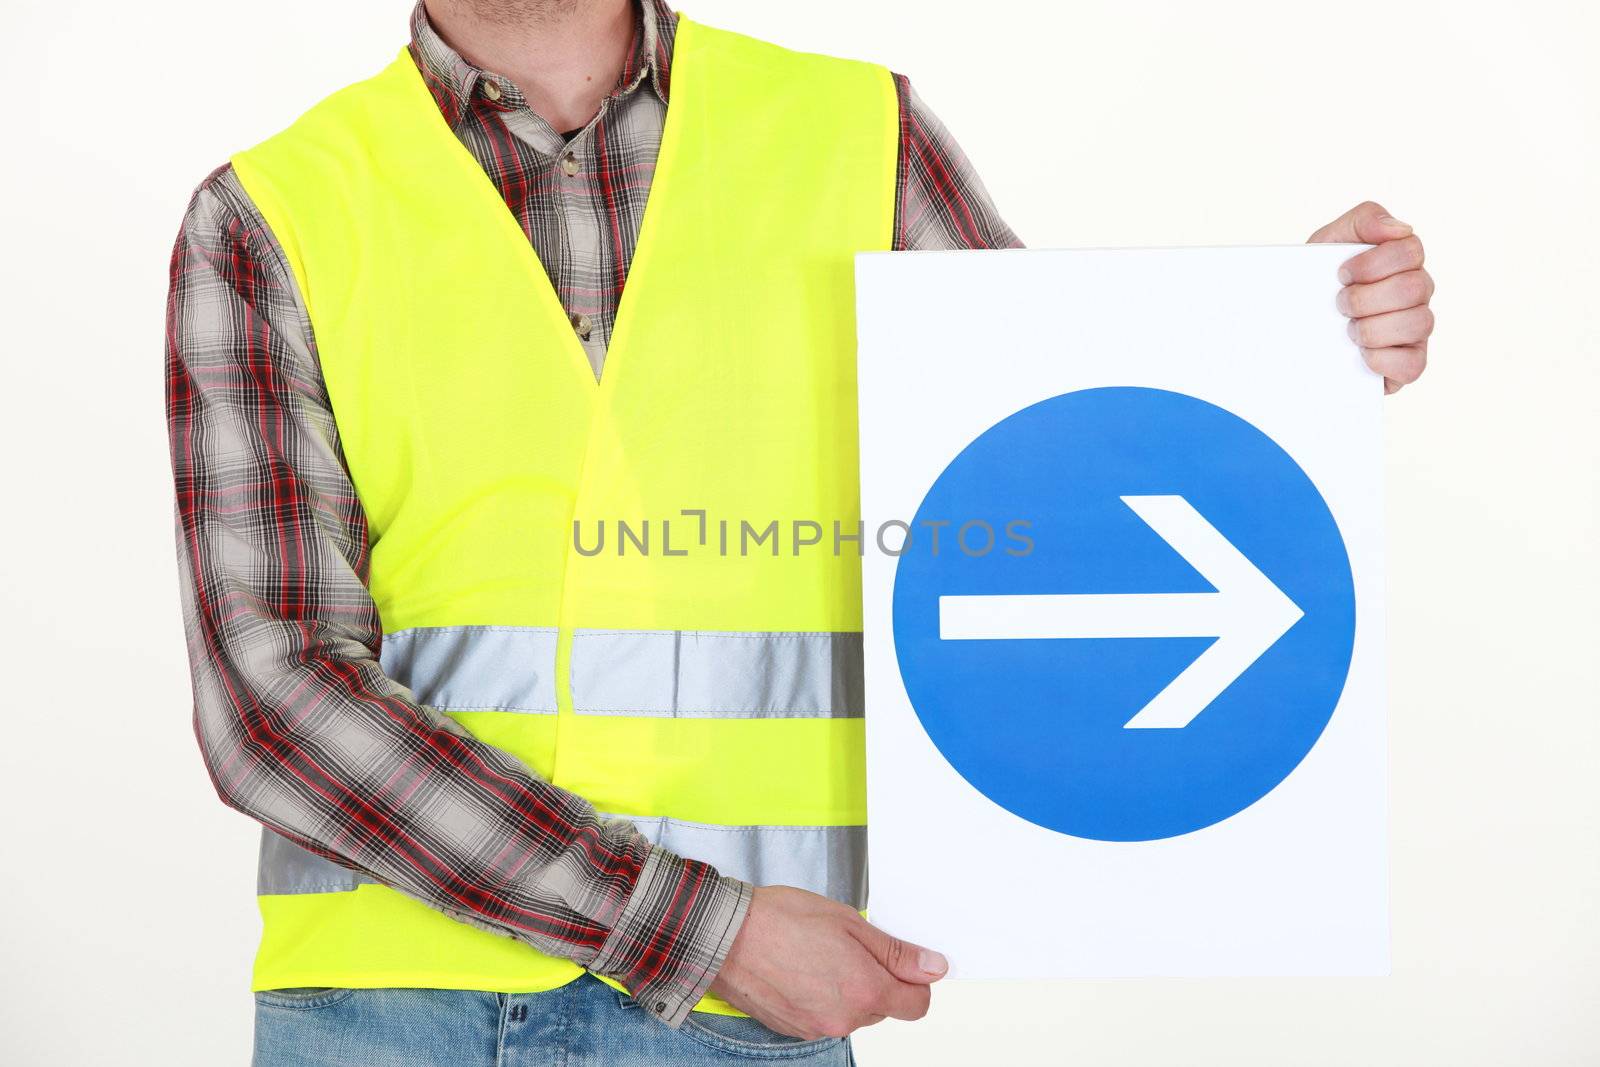 Man holding road sign by phovoir